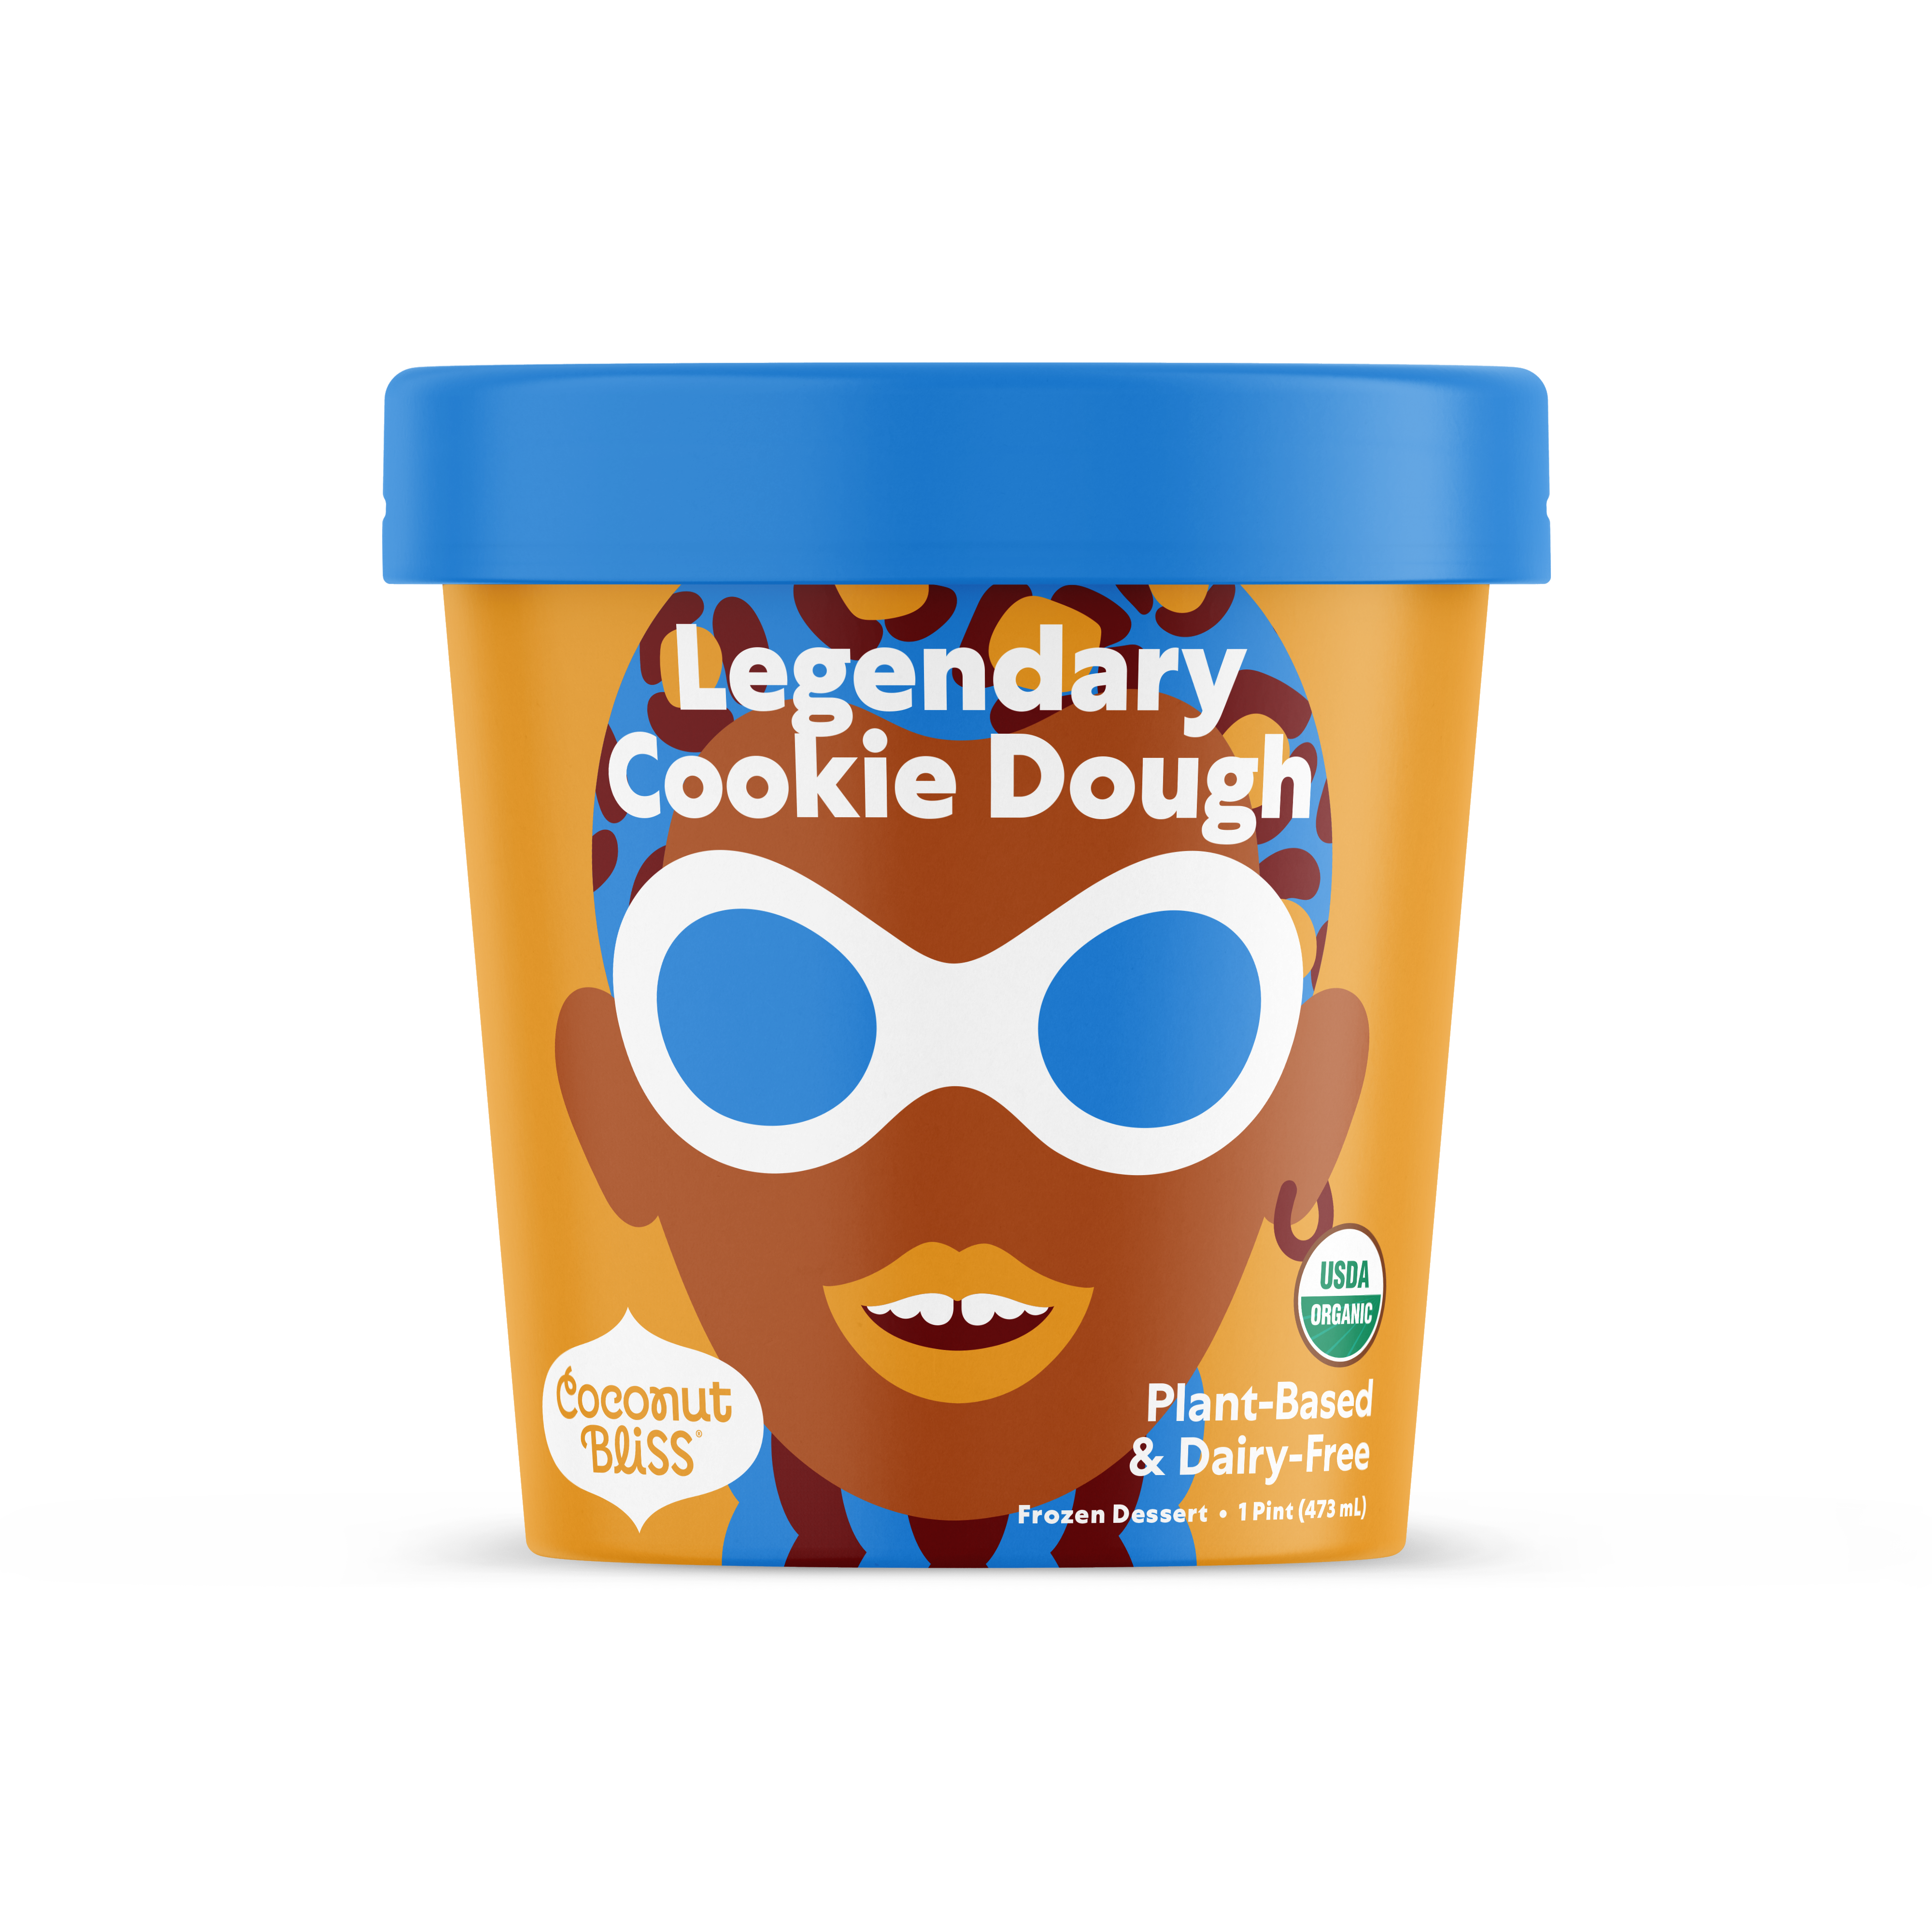 Legendary Cookie Dough is an epic new pint offering from Coconut Bliss. With vanilla as its base, the ice cream is jam-packed with cookie dough, fudgy ribbons and chocolate confetti. The pint retails for $6.99. 